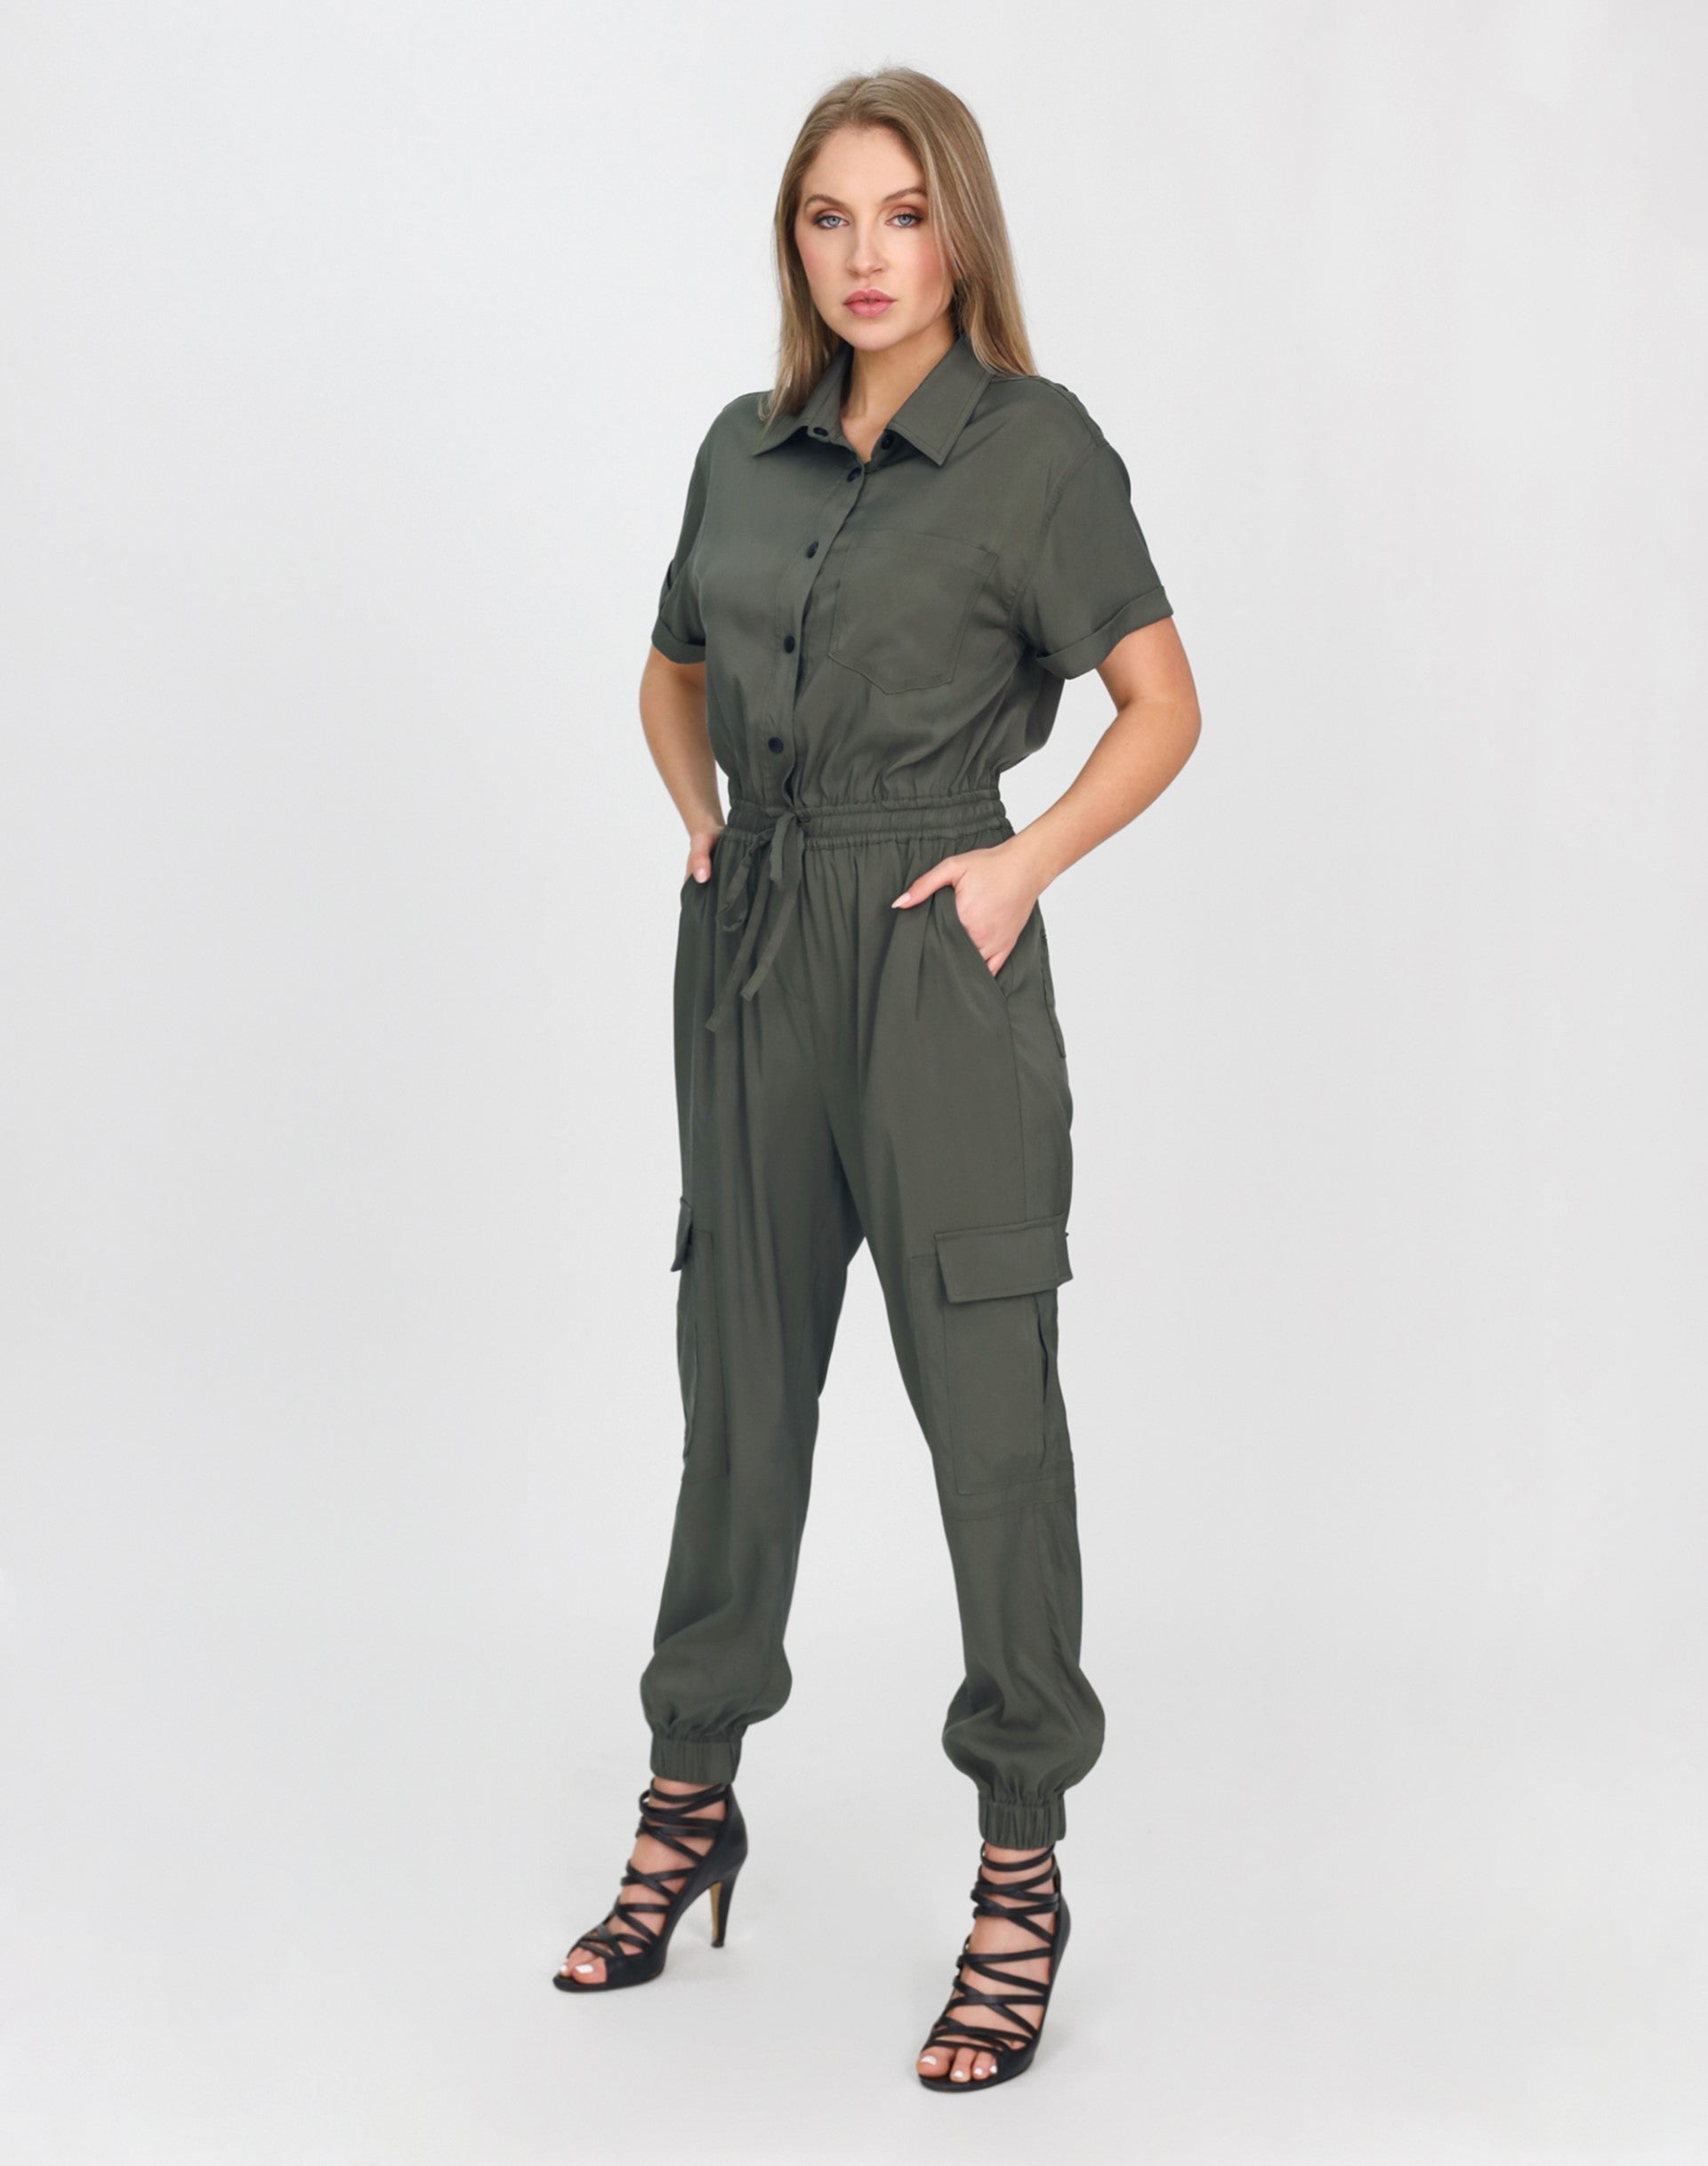 SALE: Olive Green Loose Jumpsuit With Short Sleeve | SilkFred US